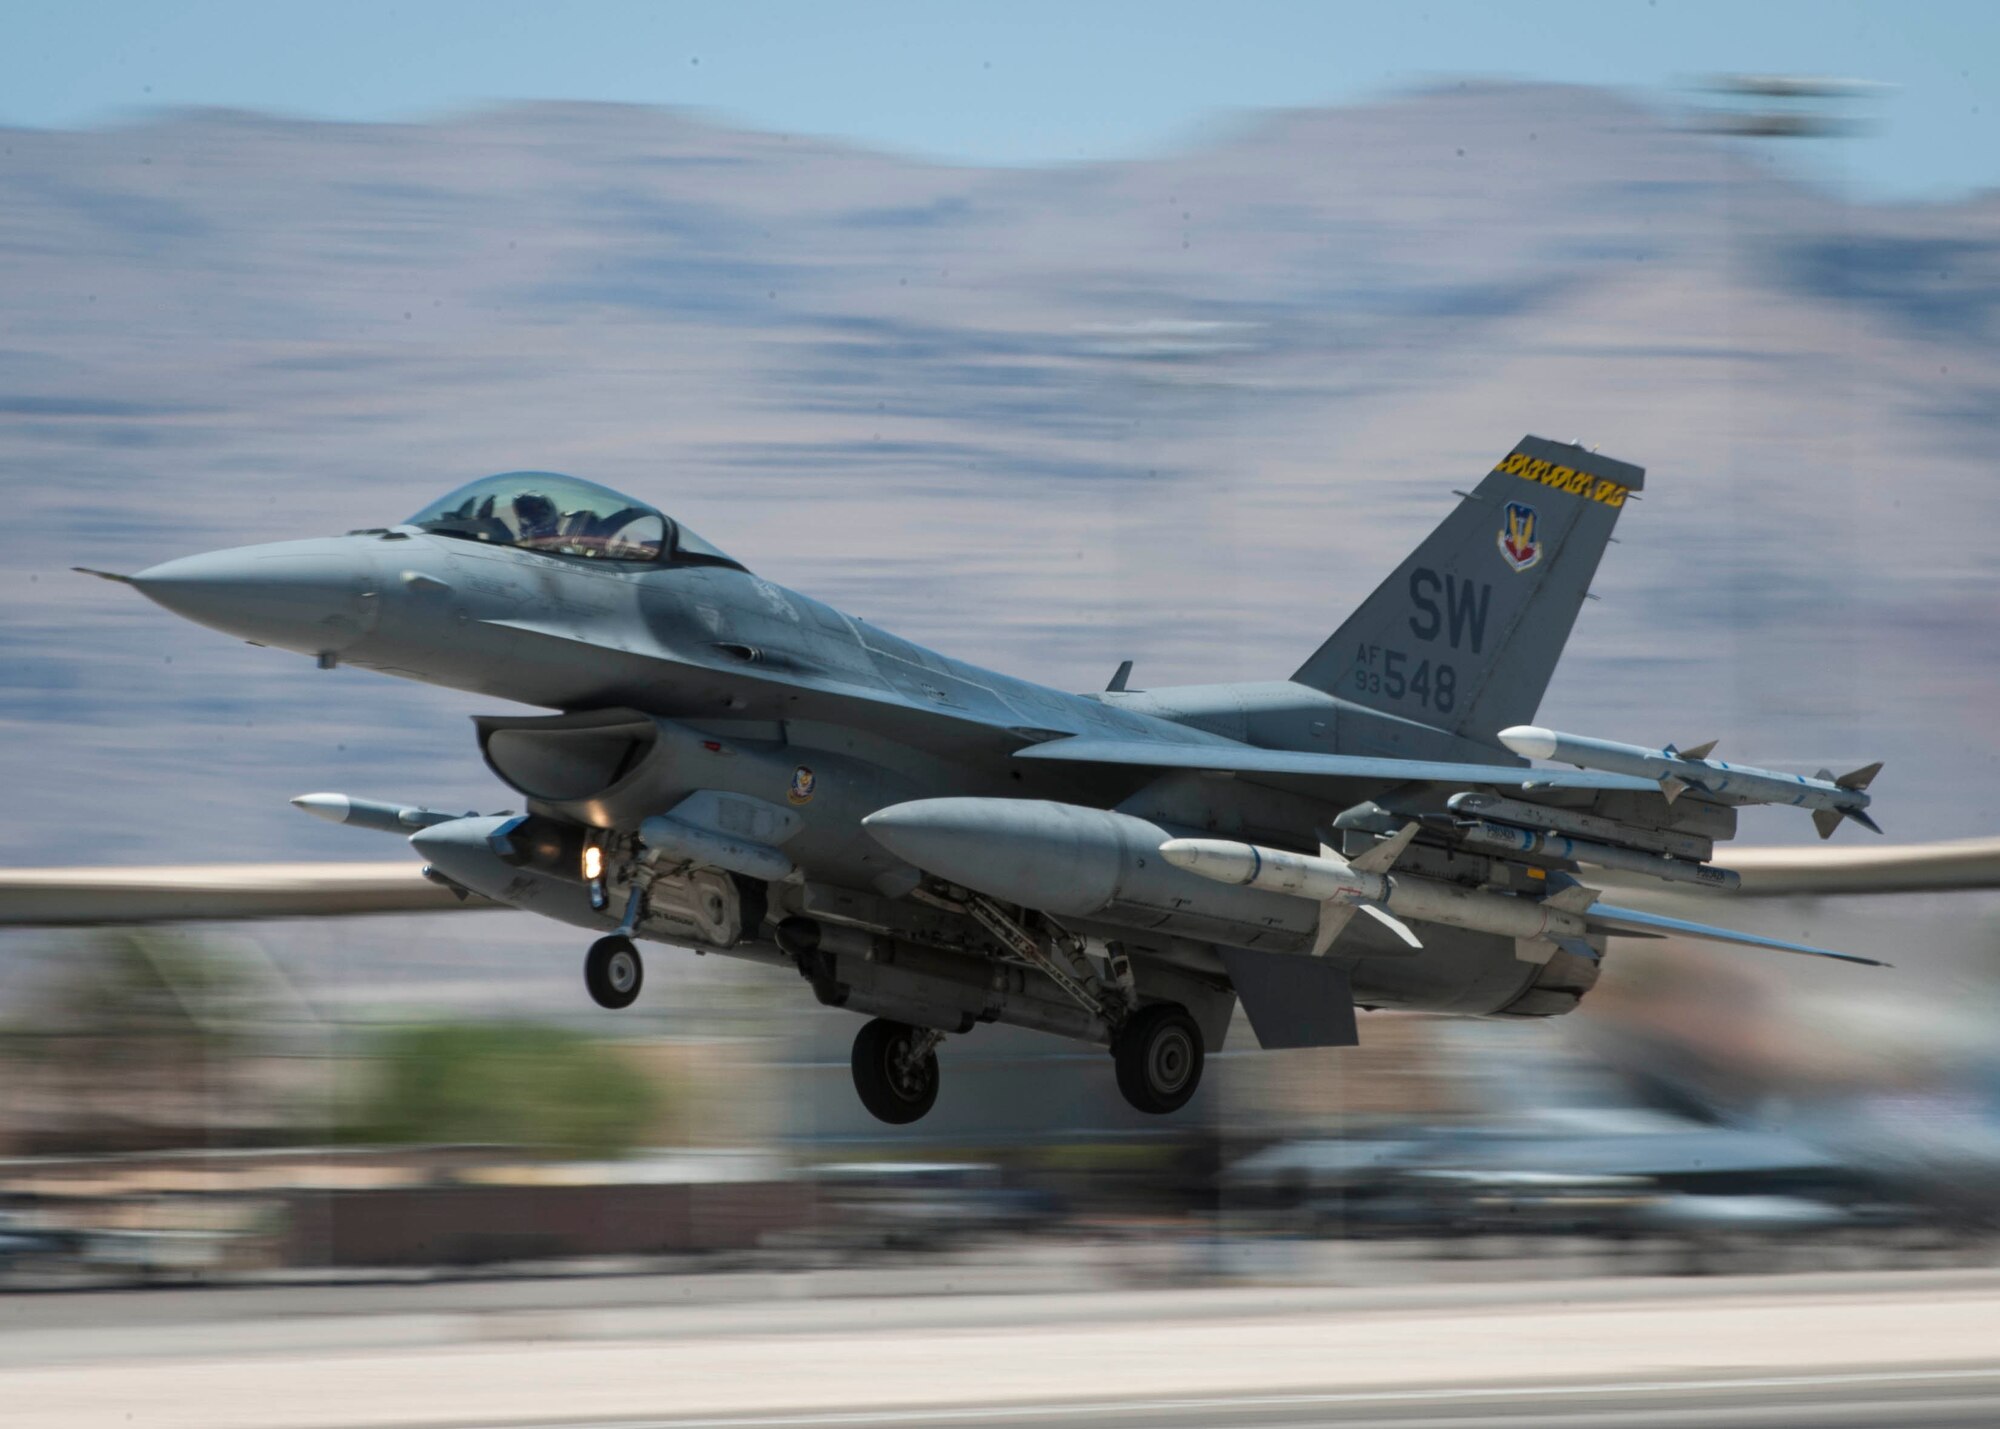 An F-16CJ from the 20th Fighter Wing, Shaw Air Force Base, S.C., takes off from the Nellis Air Force Base, Nev., flightline to participate in Red Flag 16-3, July 19, 2016. Red Flag, which is conducted by the 414th Combat Training Squadron at Nellis AFB, is a realistic combat training exercise involving the air forces of the U.S. and its allies that maximizes the combat readiness and survivability of participants by providing a realistic training environment. (U.S. Air Force photo by Senior Airman Jake Carter/Released)